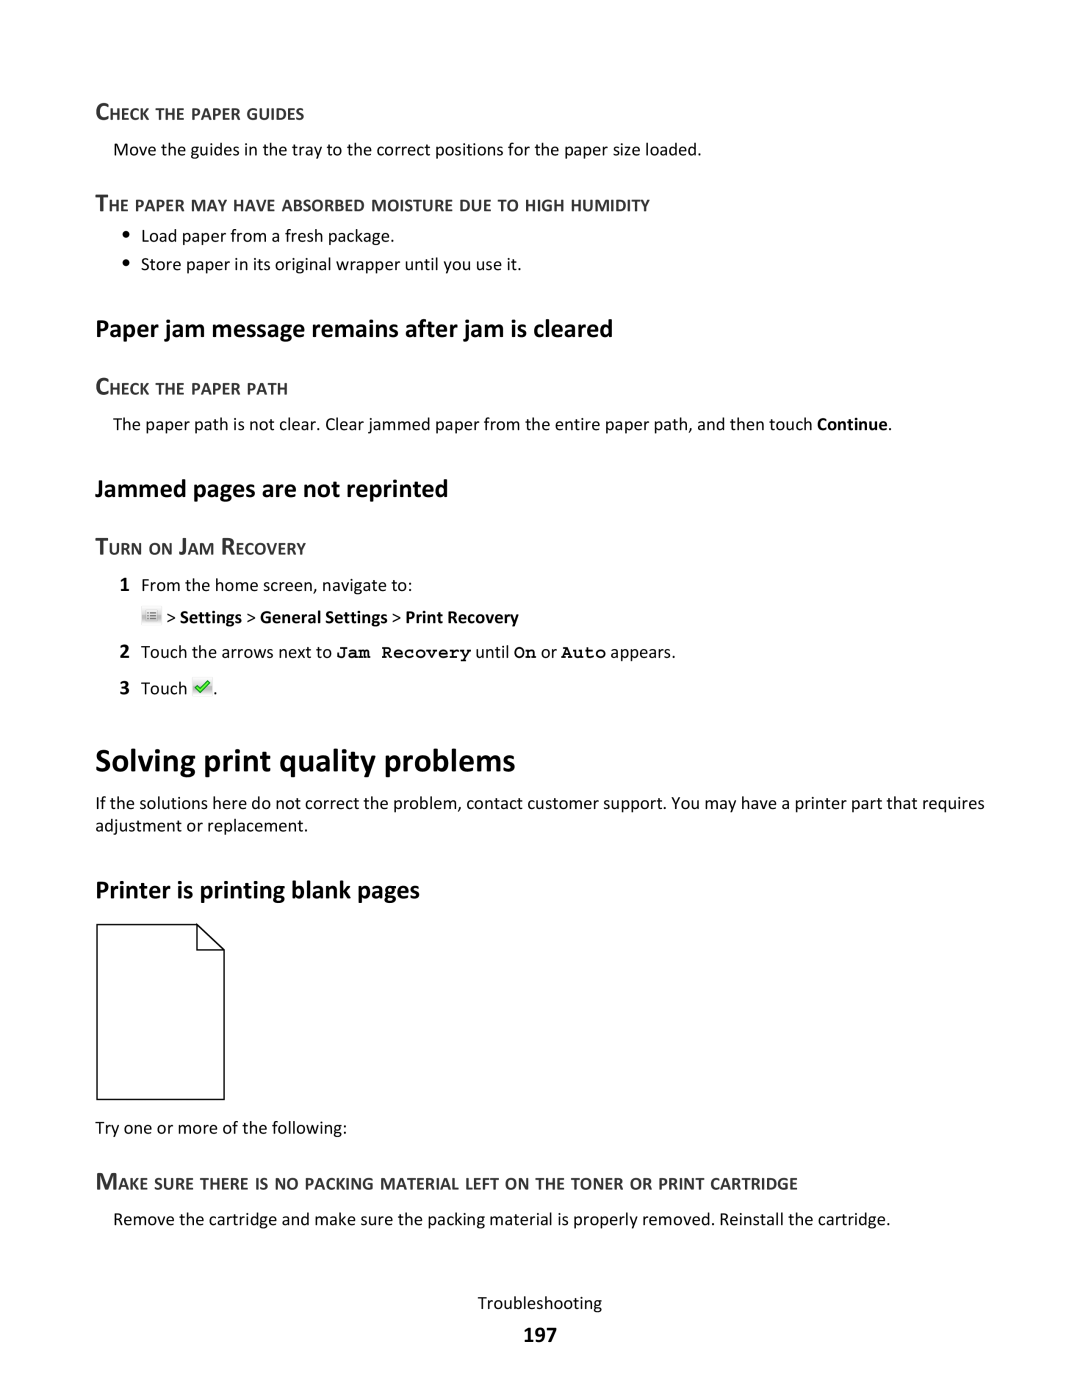 Lexmark C790 manual Solving print quality problems, Paper jam message remains after jam is cleared, Check The Paper Guides 